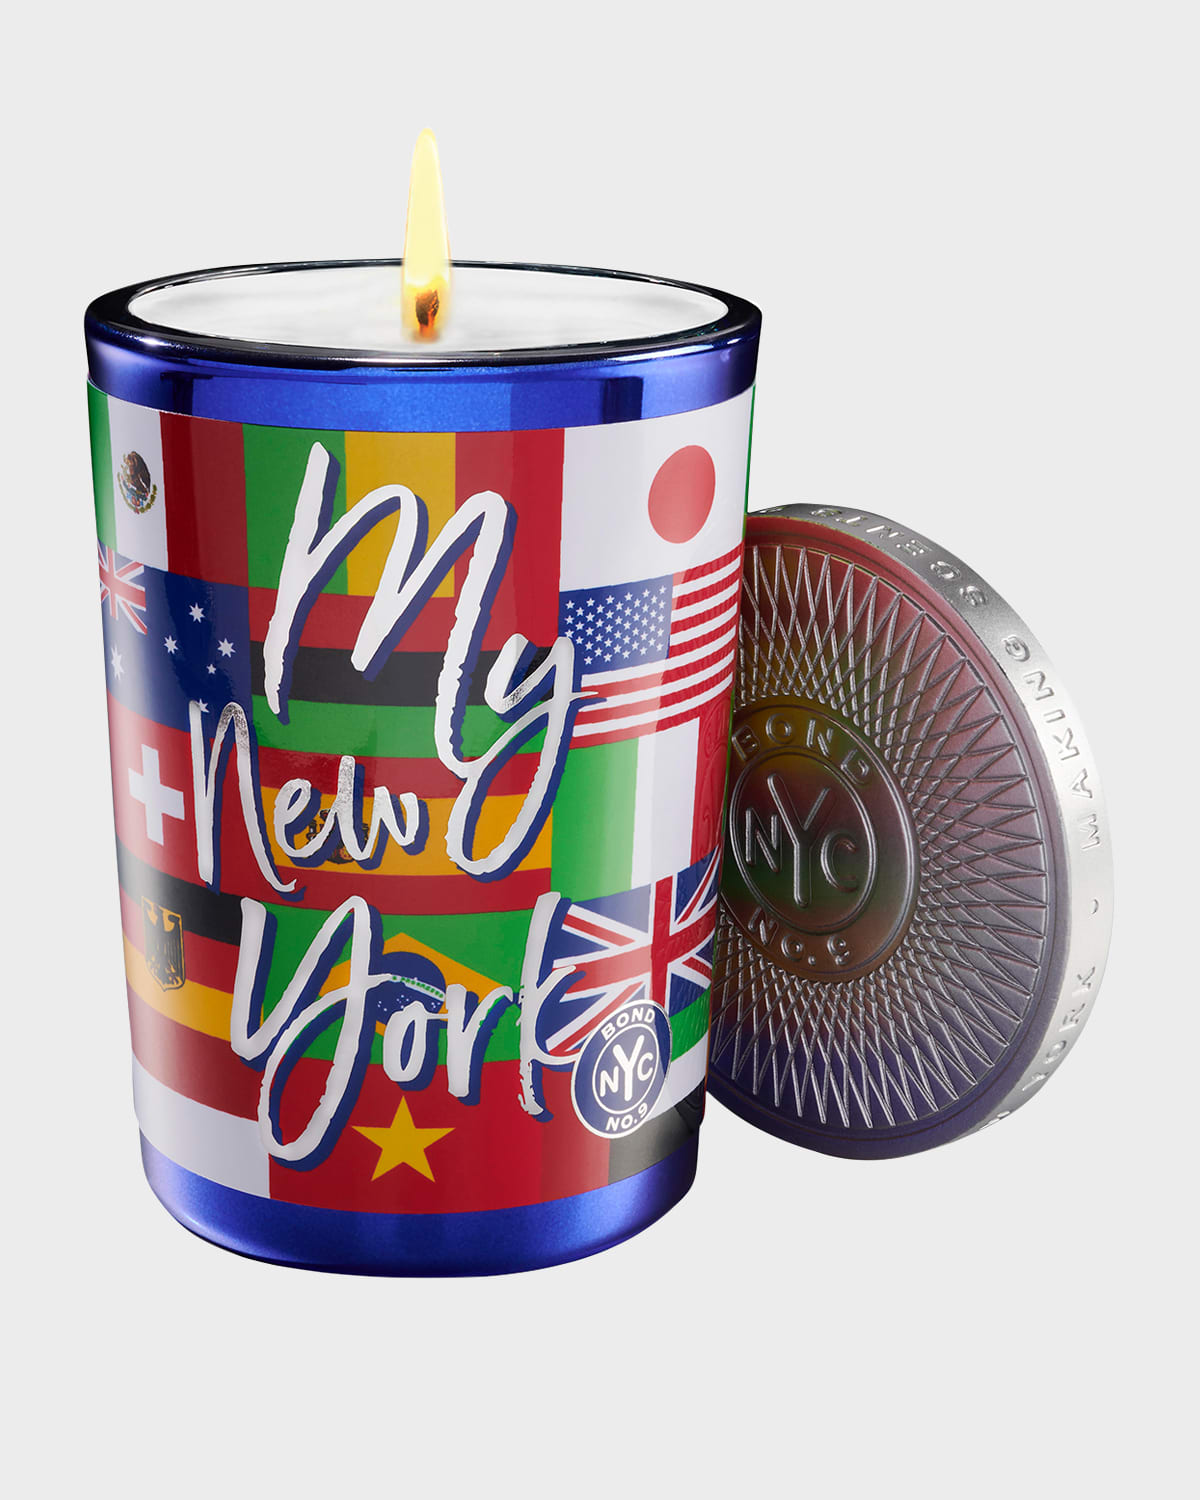 Bond No.9 New York 6.4 Oz. My New York Scented Candle